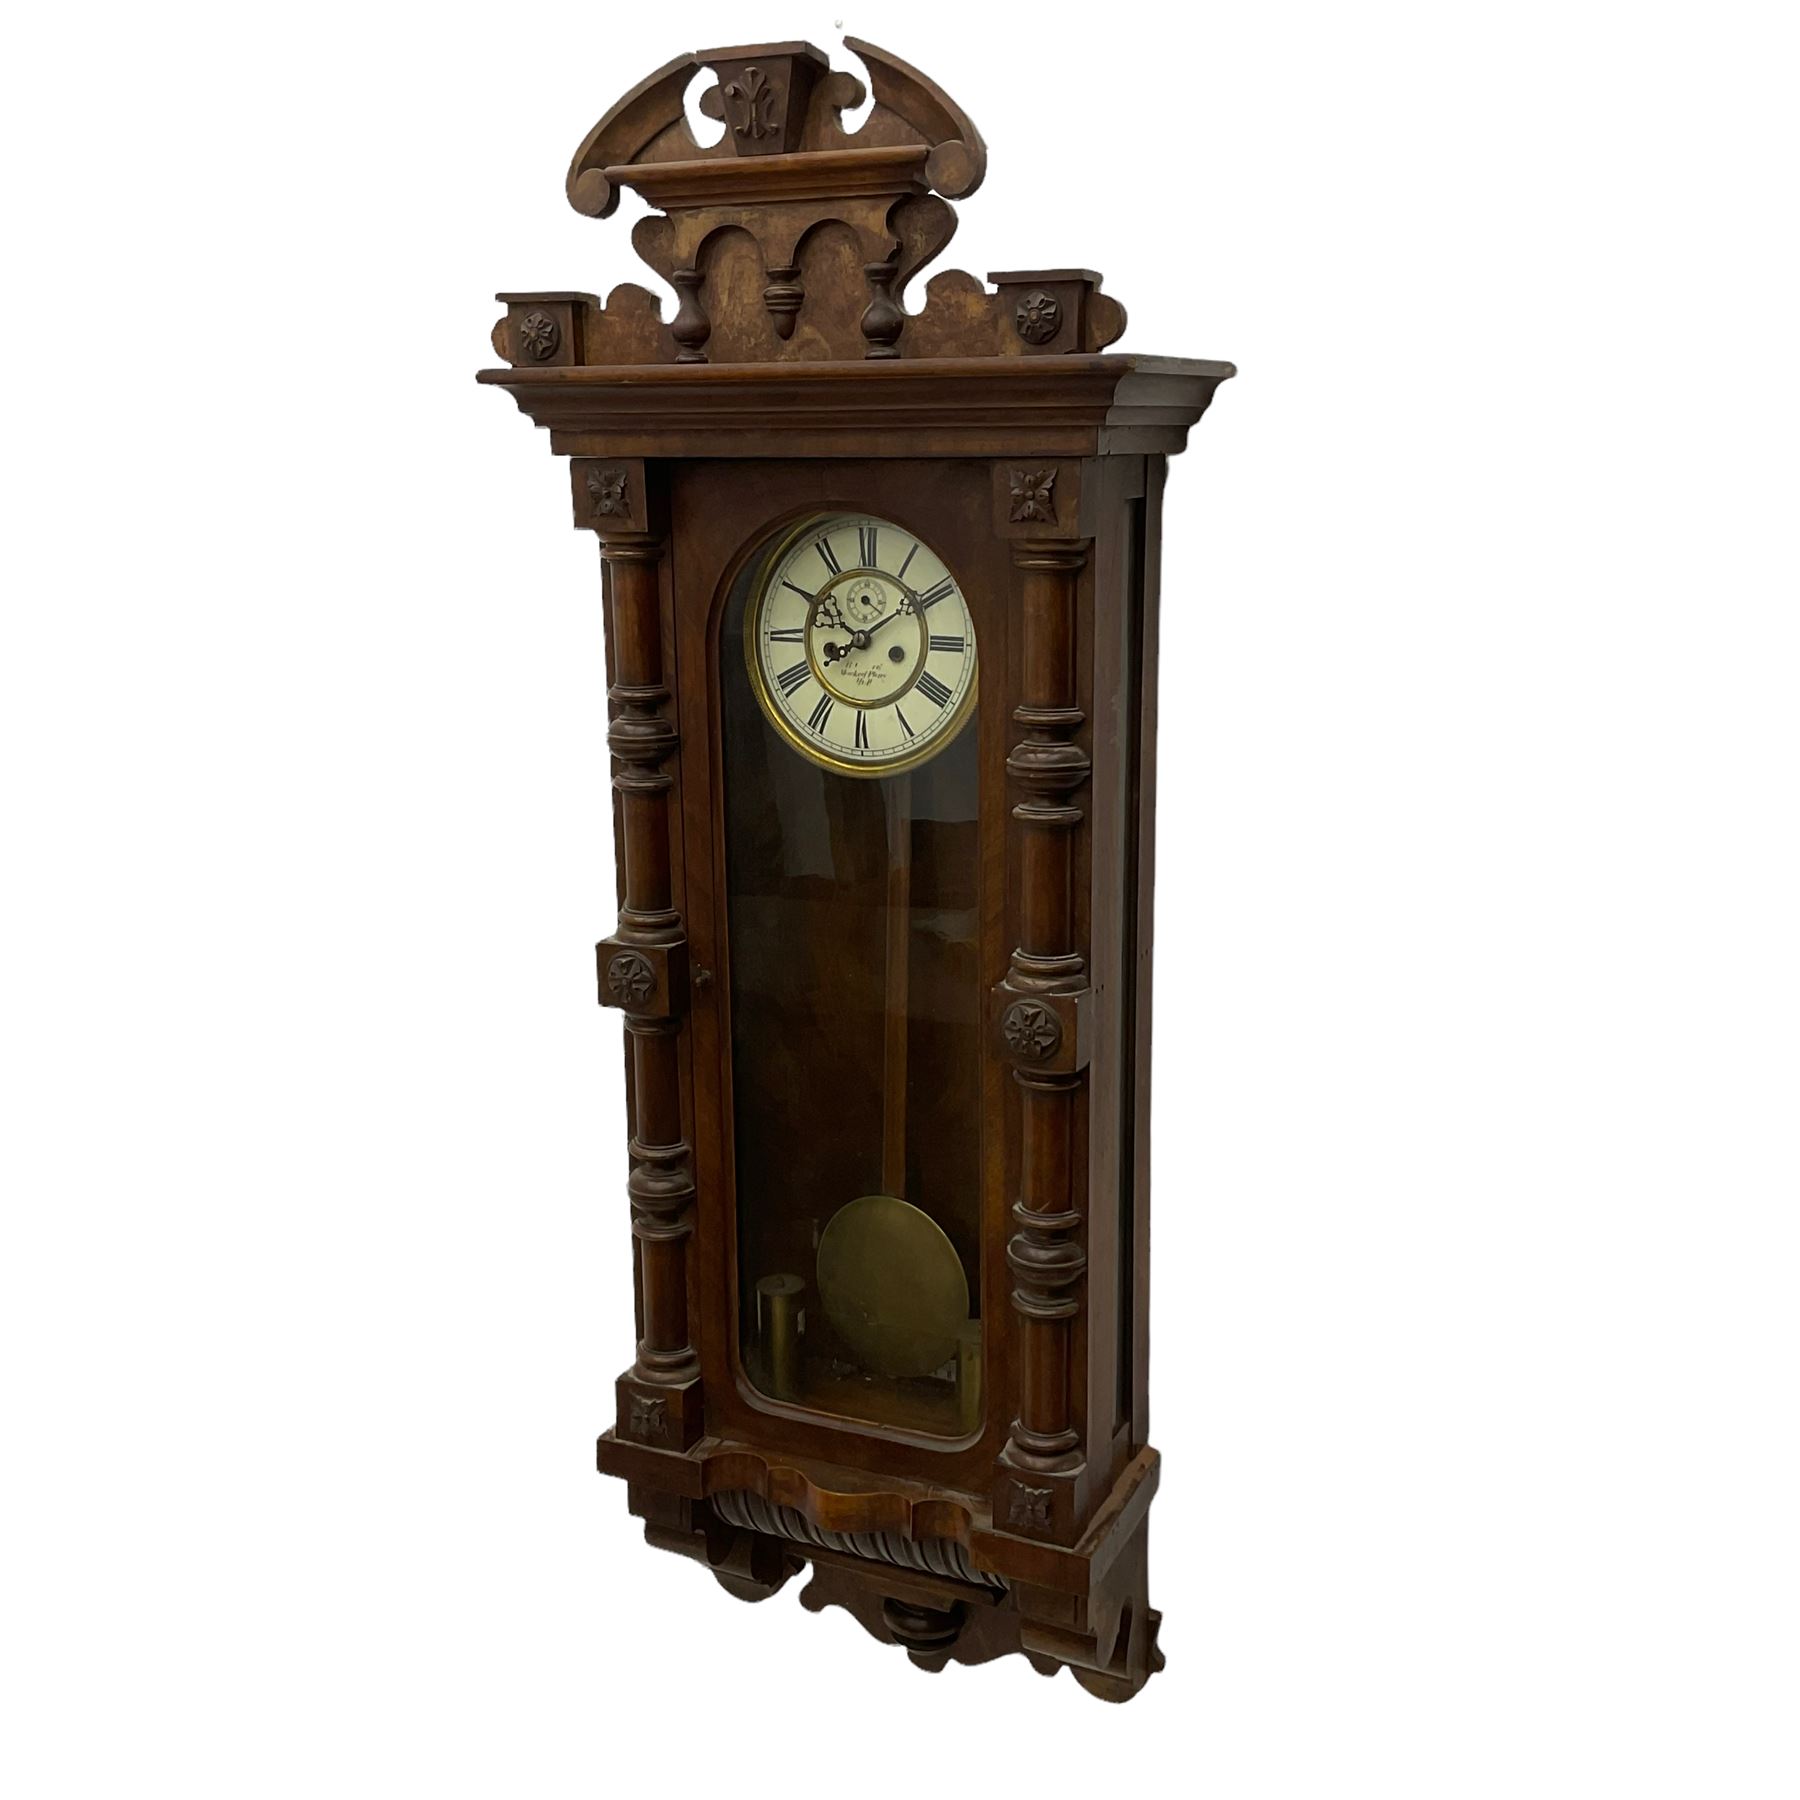 A large German wall clock c 1890 with a twin weight striking movement - Image 2 of 4